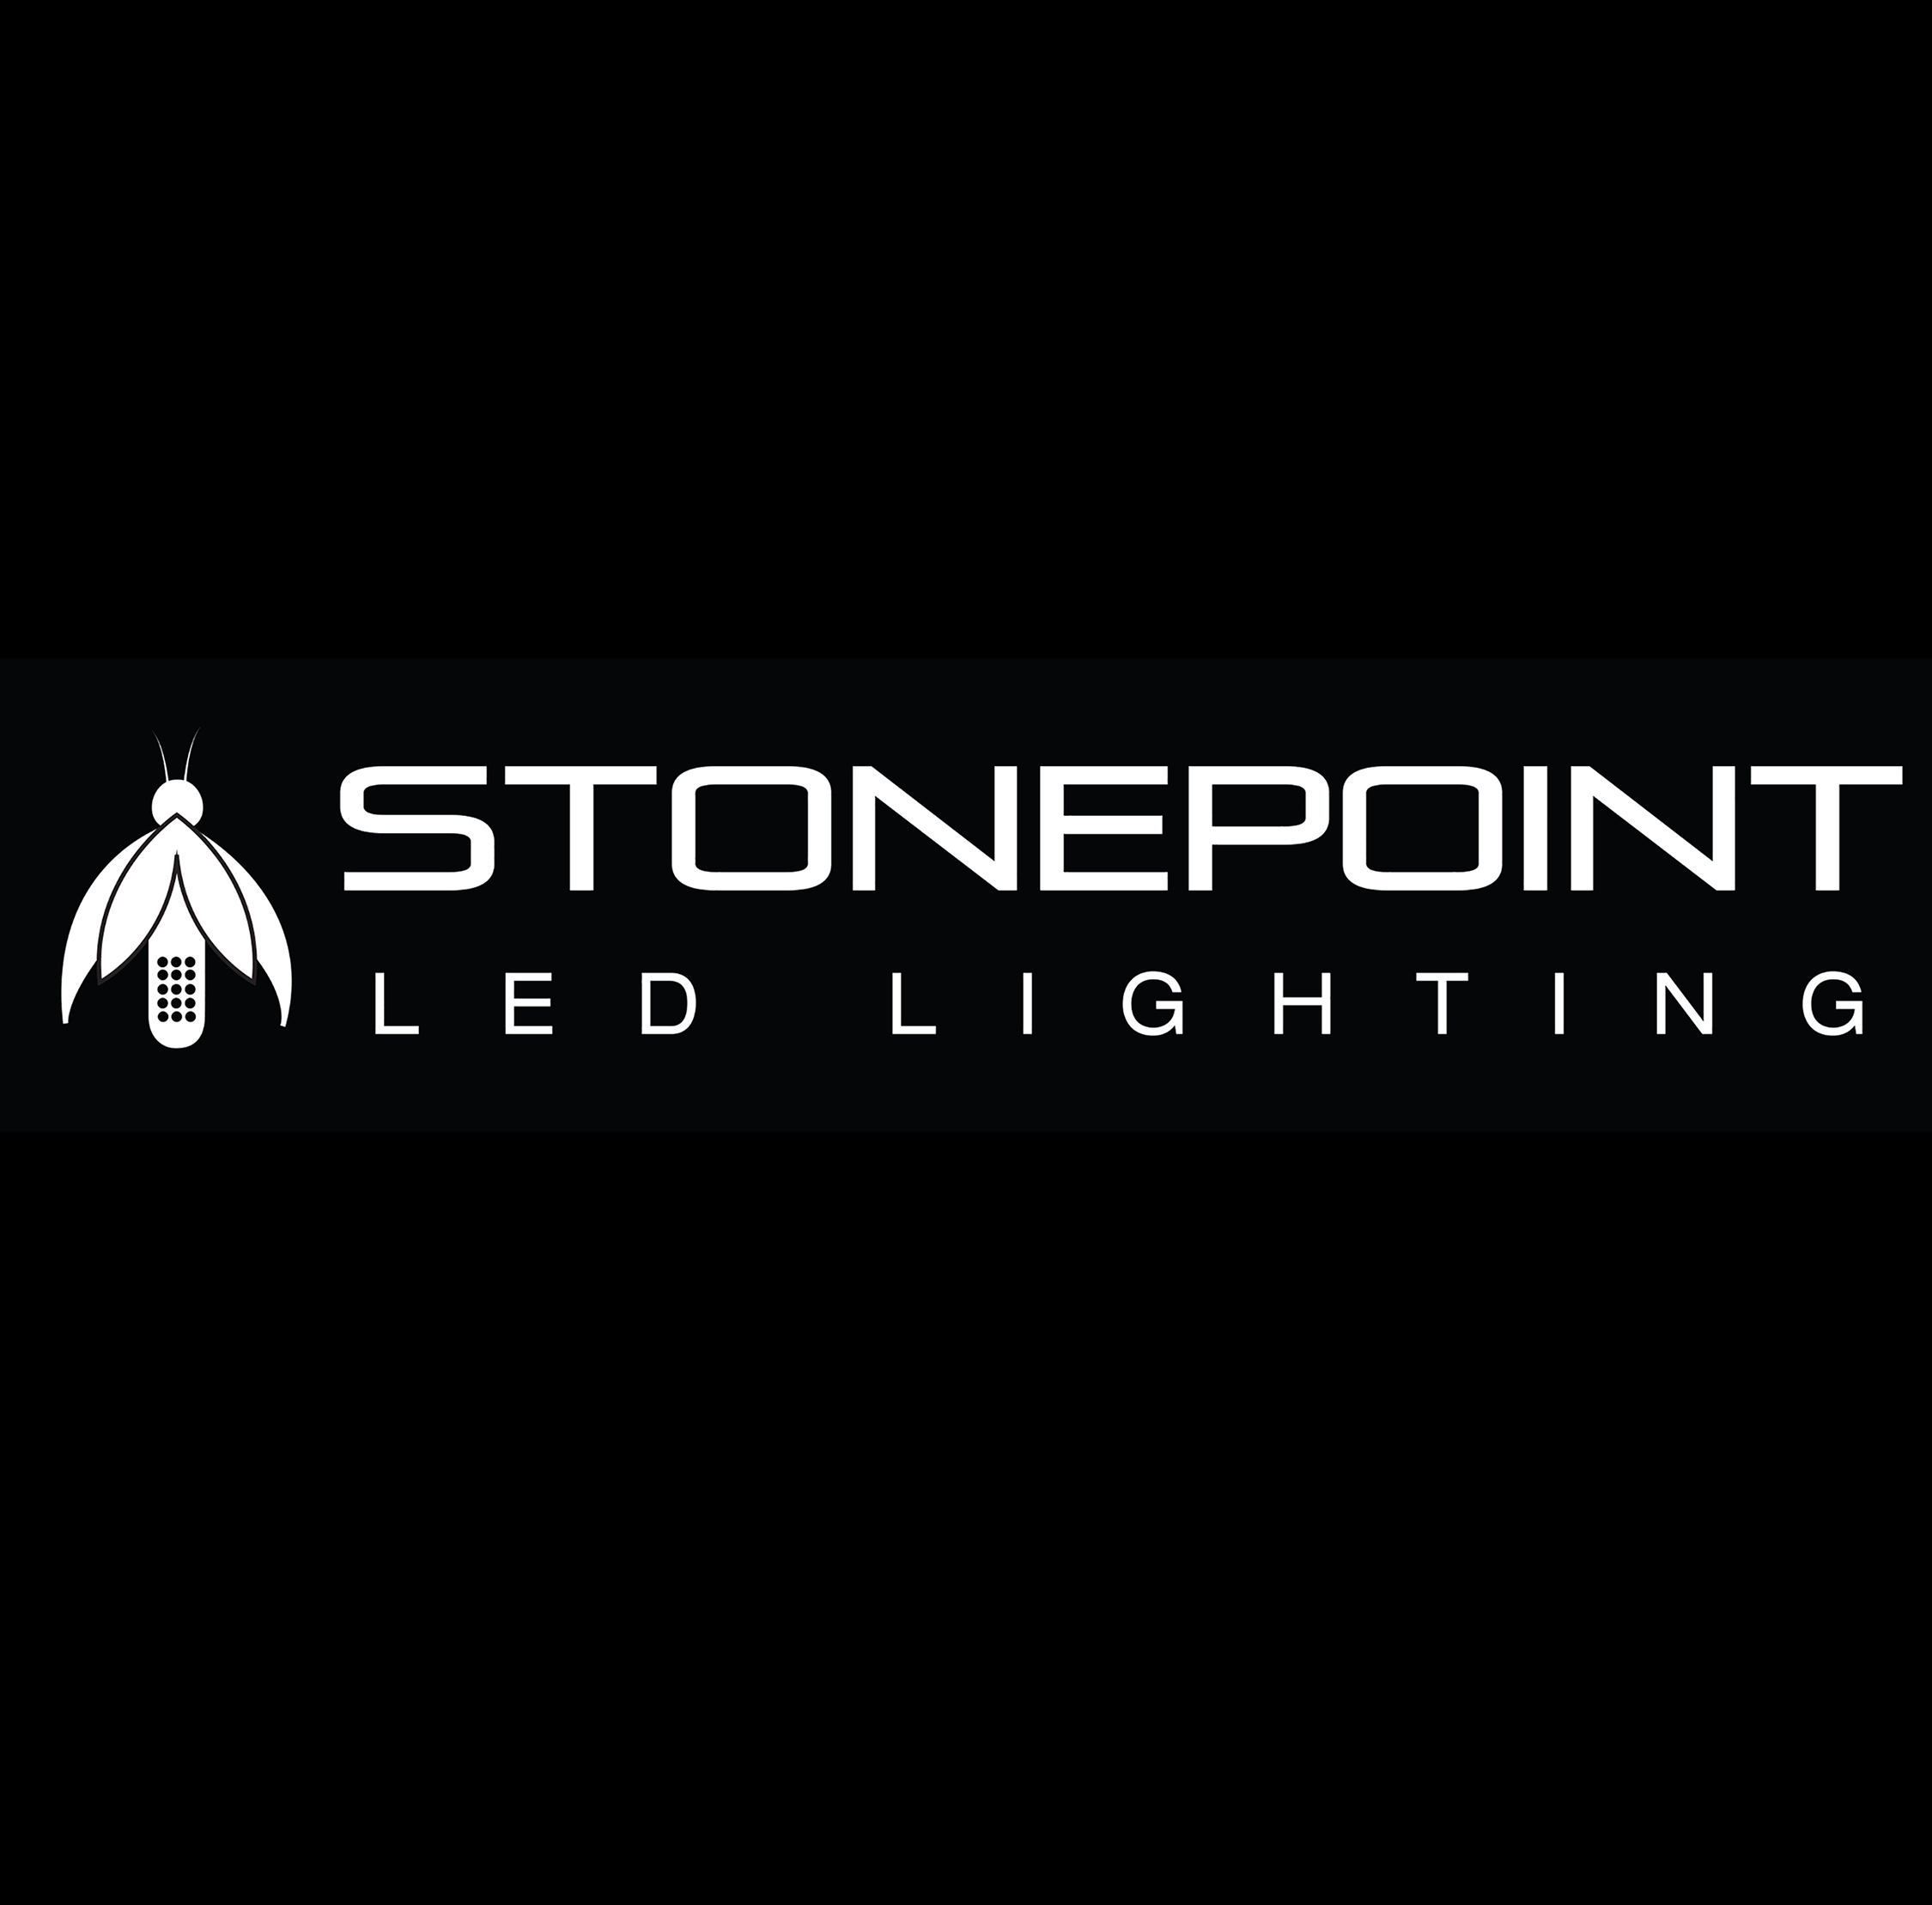 A black and white logo of stonepoint led lighting